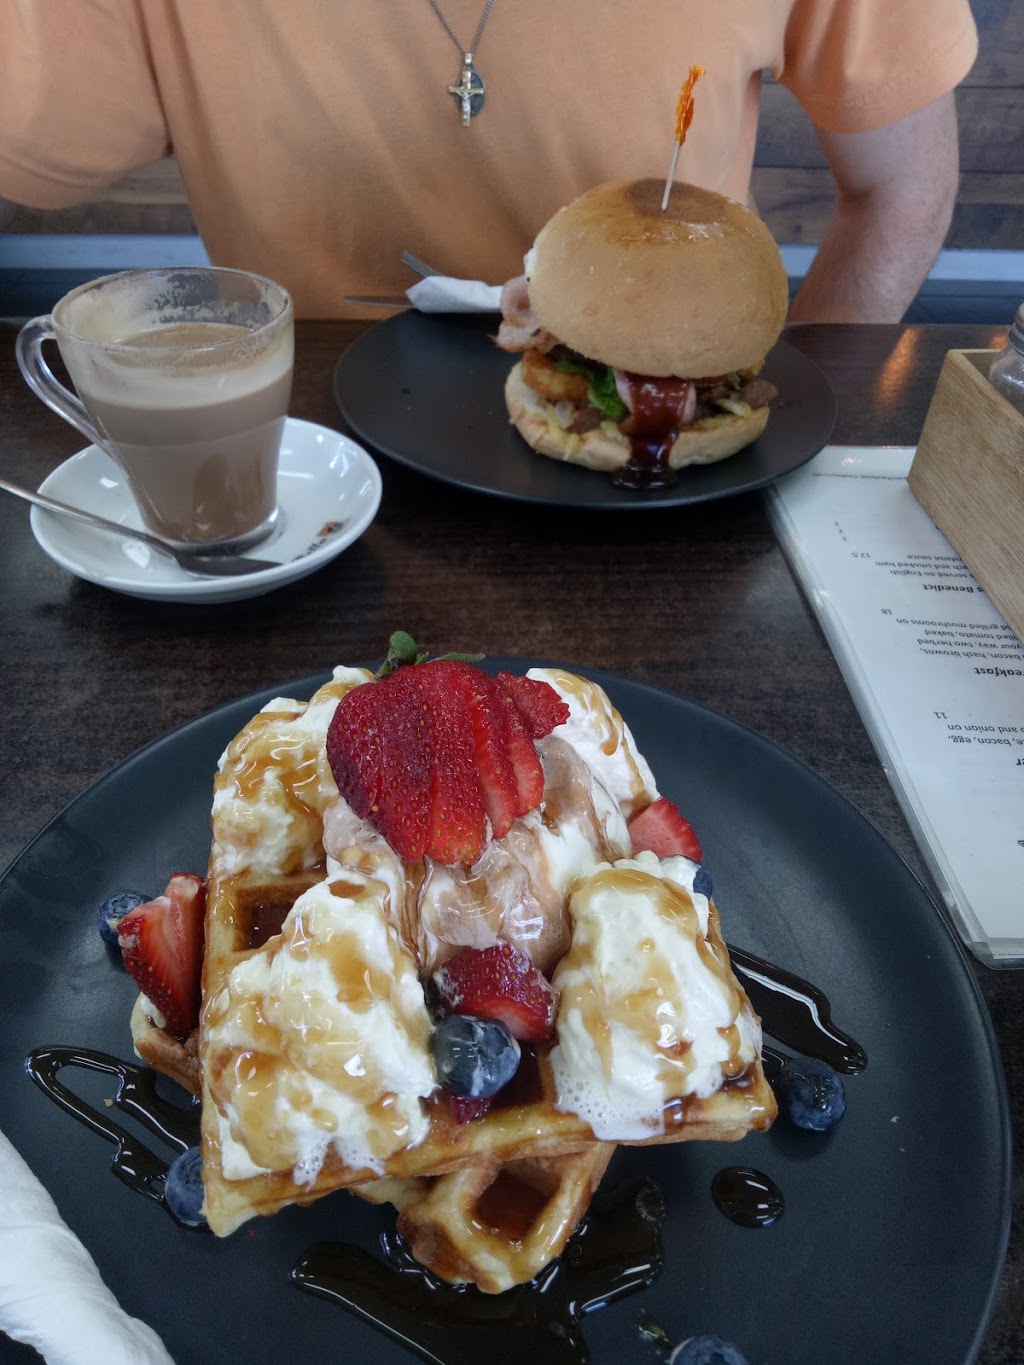 Cool Beans Cafe | cafe | Shop 12/353 Beaconsfield Terrace, Brighton QLD 4017, Australia | 0732691964 OR +61 7 3269 1964